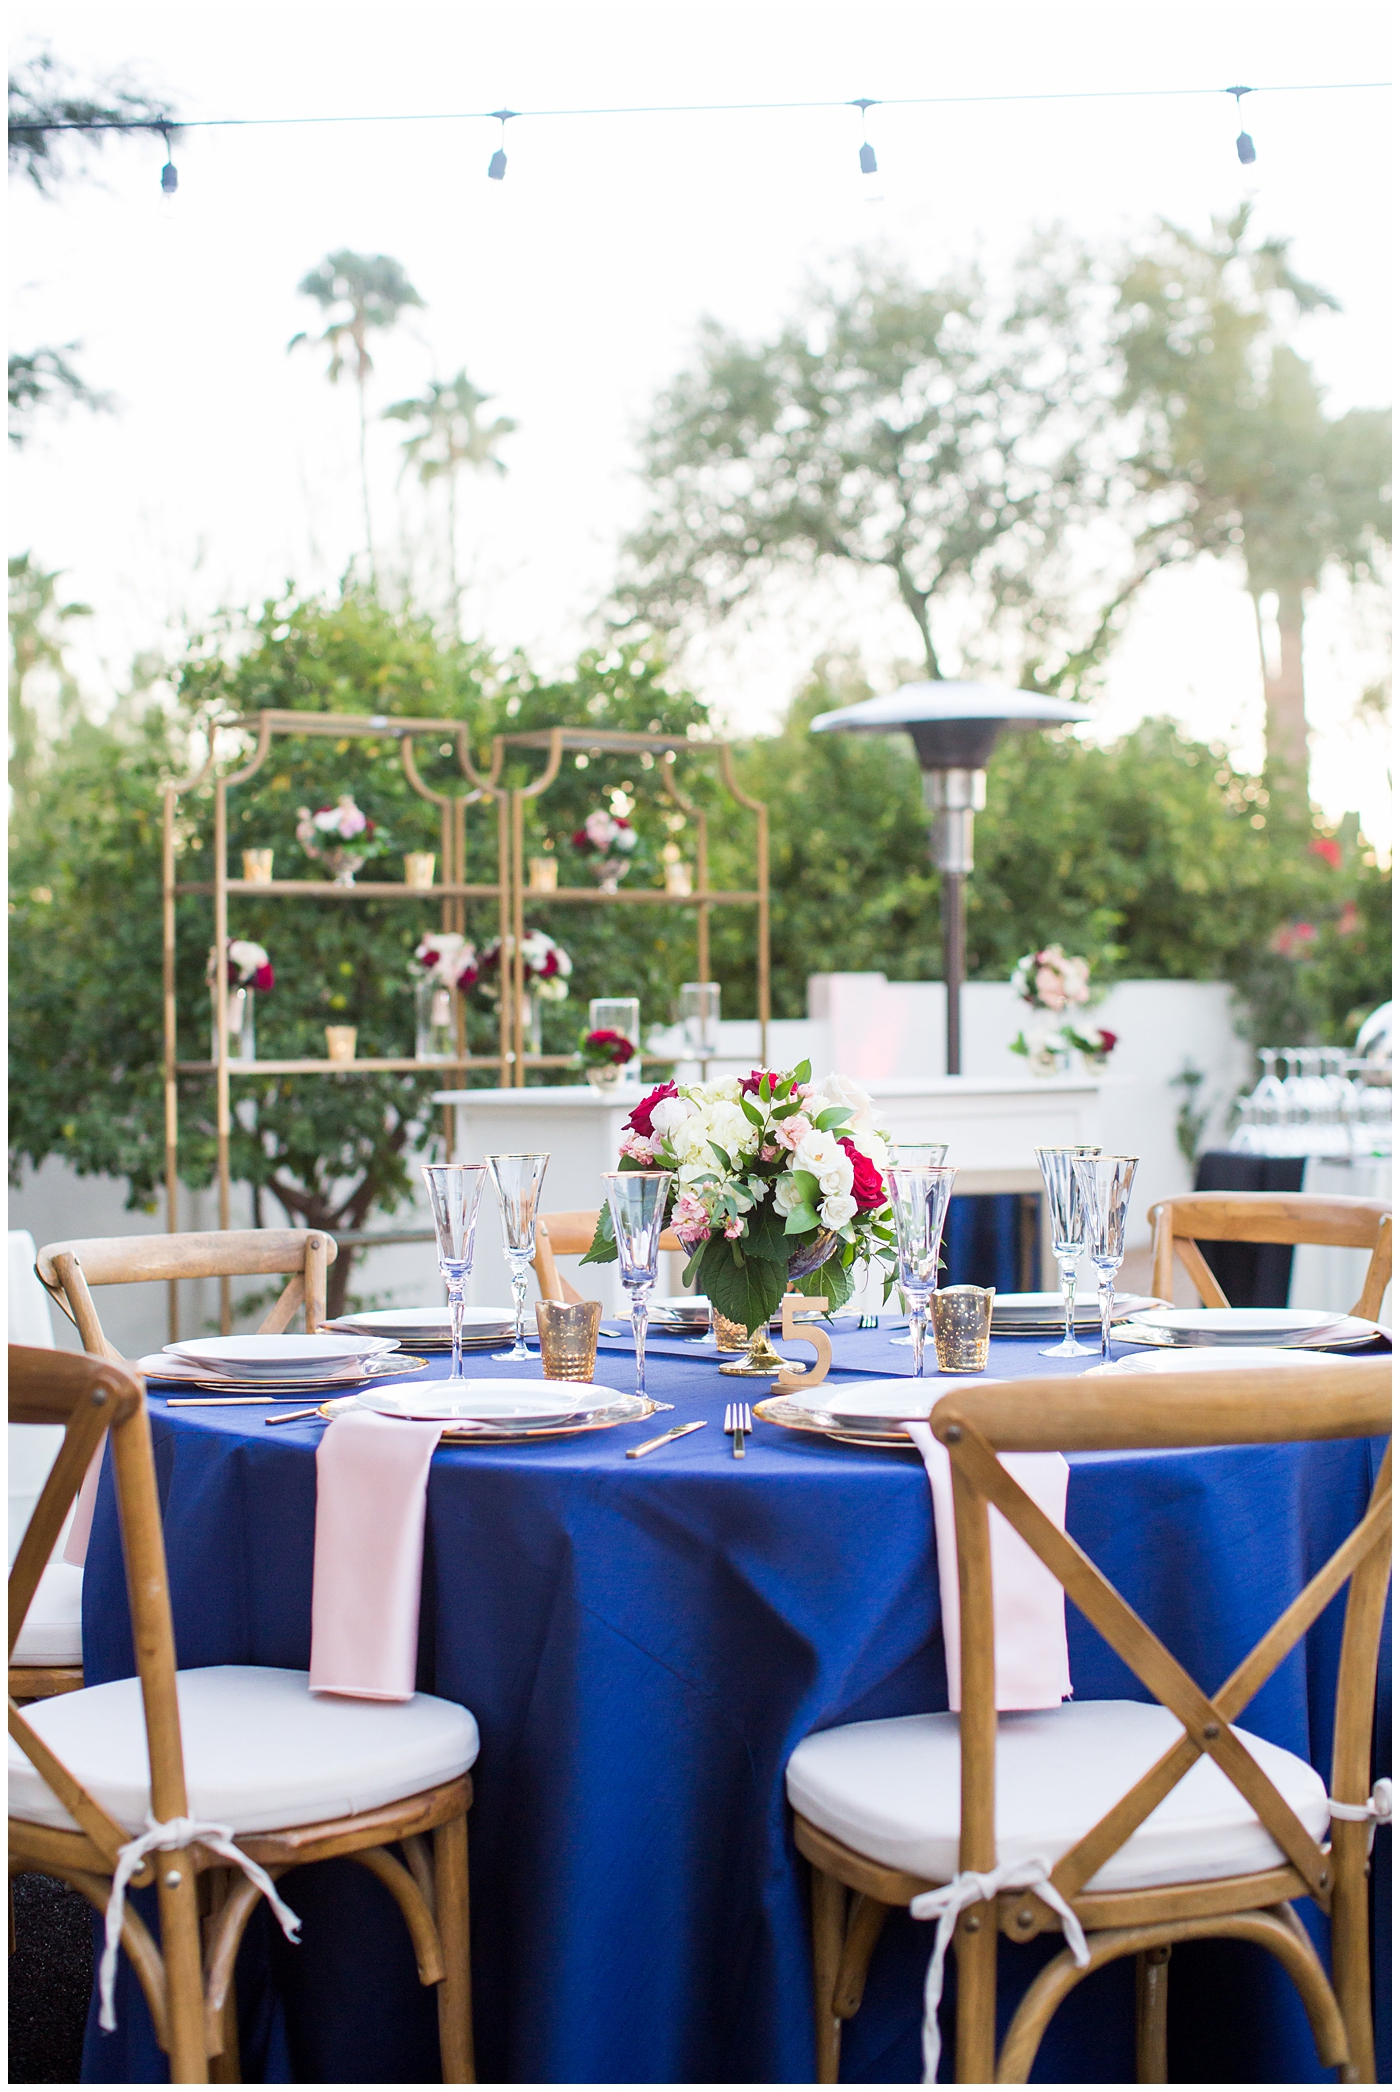 reception details tables with blue linens, gold table numbers and candles with white and red rose centerpieces